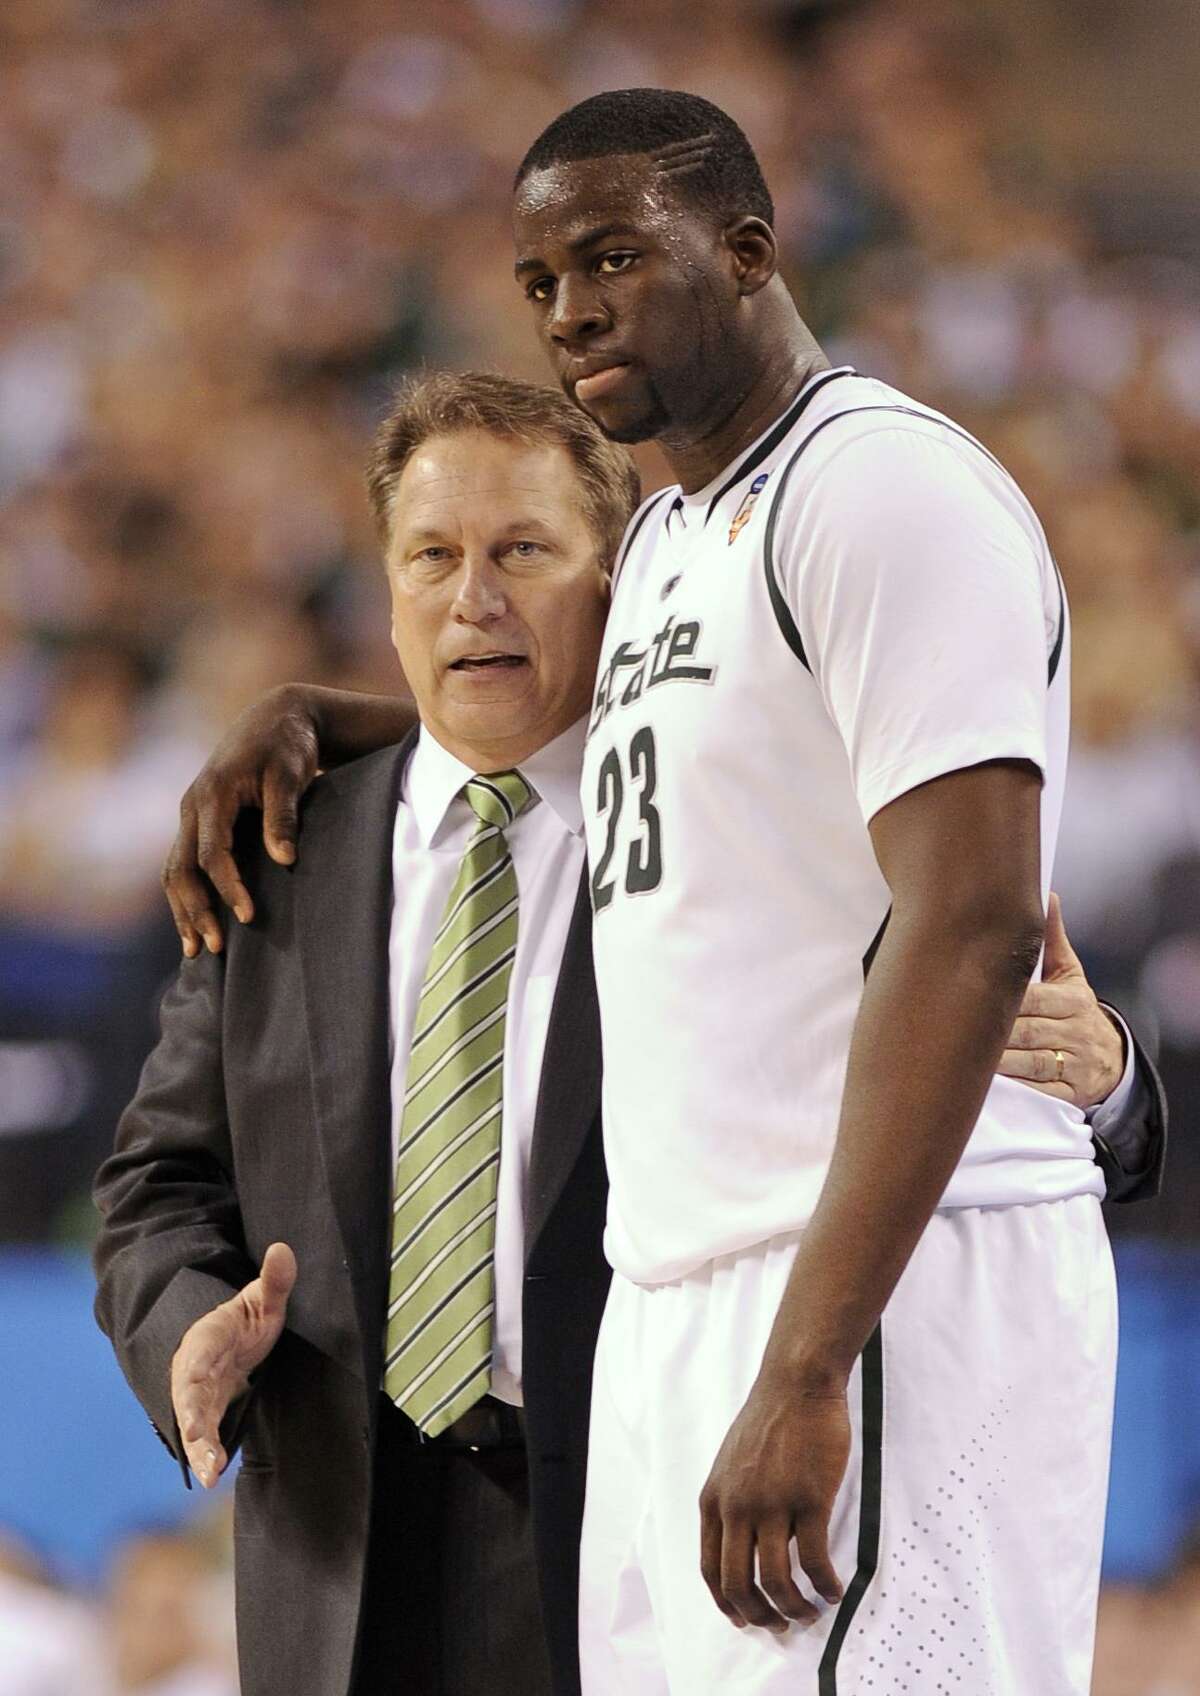 Michigan State head coach Tom Izzo talks with forward Draymond Green during the second half against Butler in a men's NCAA Final Four semifinal college basketball game Saturday, April 3, 2010, in Indianapolis. (AP Photo/Mark J. Terrill)